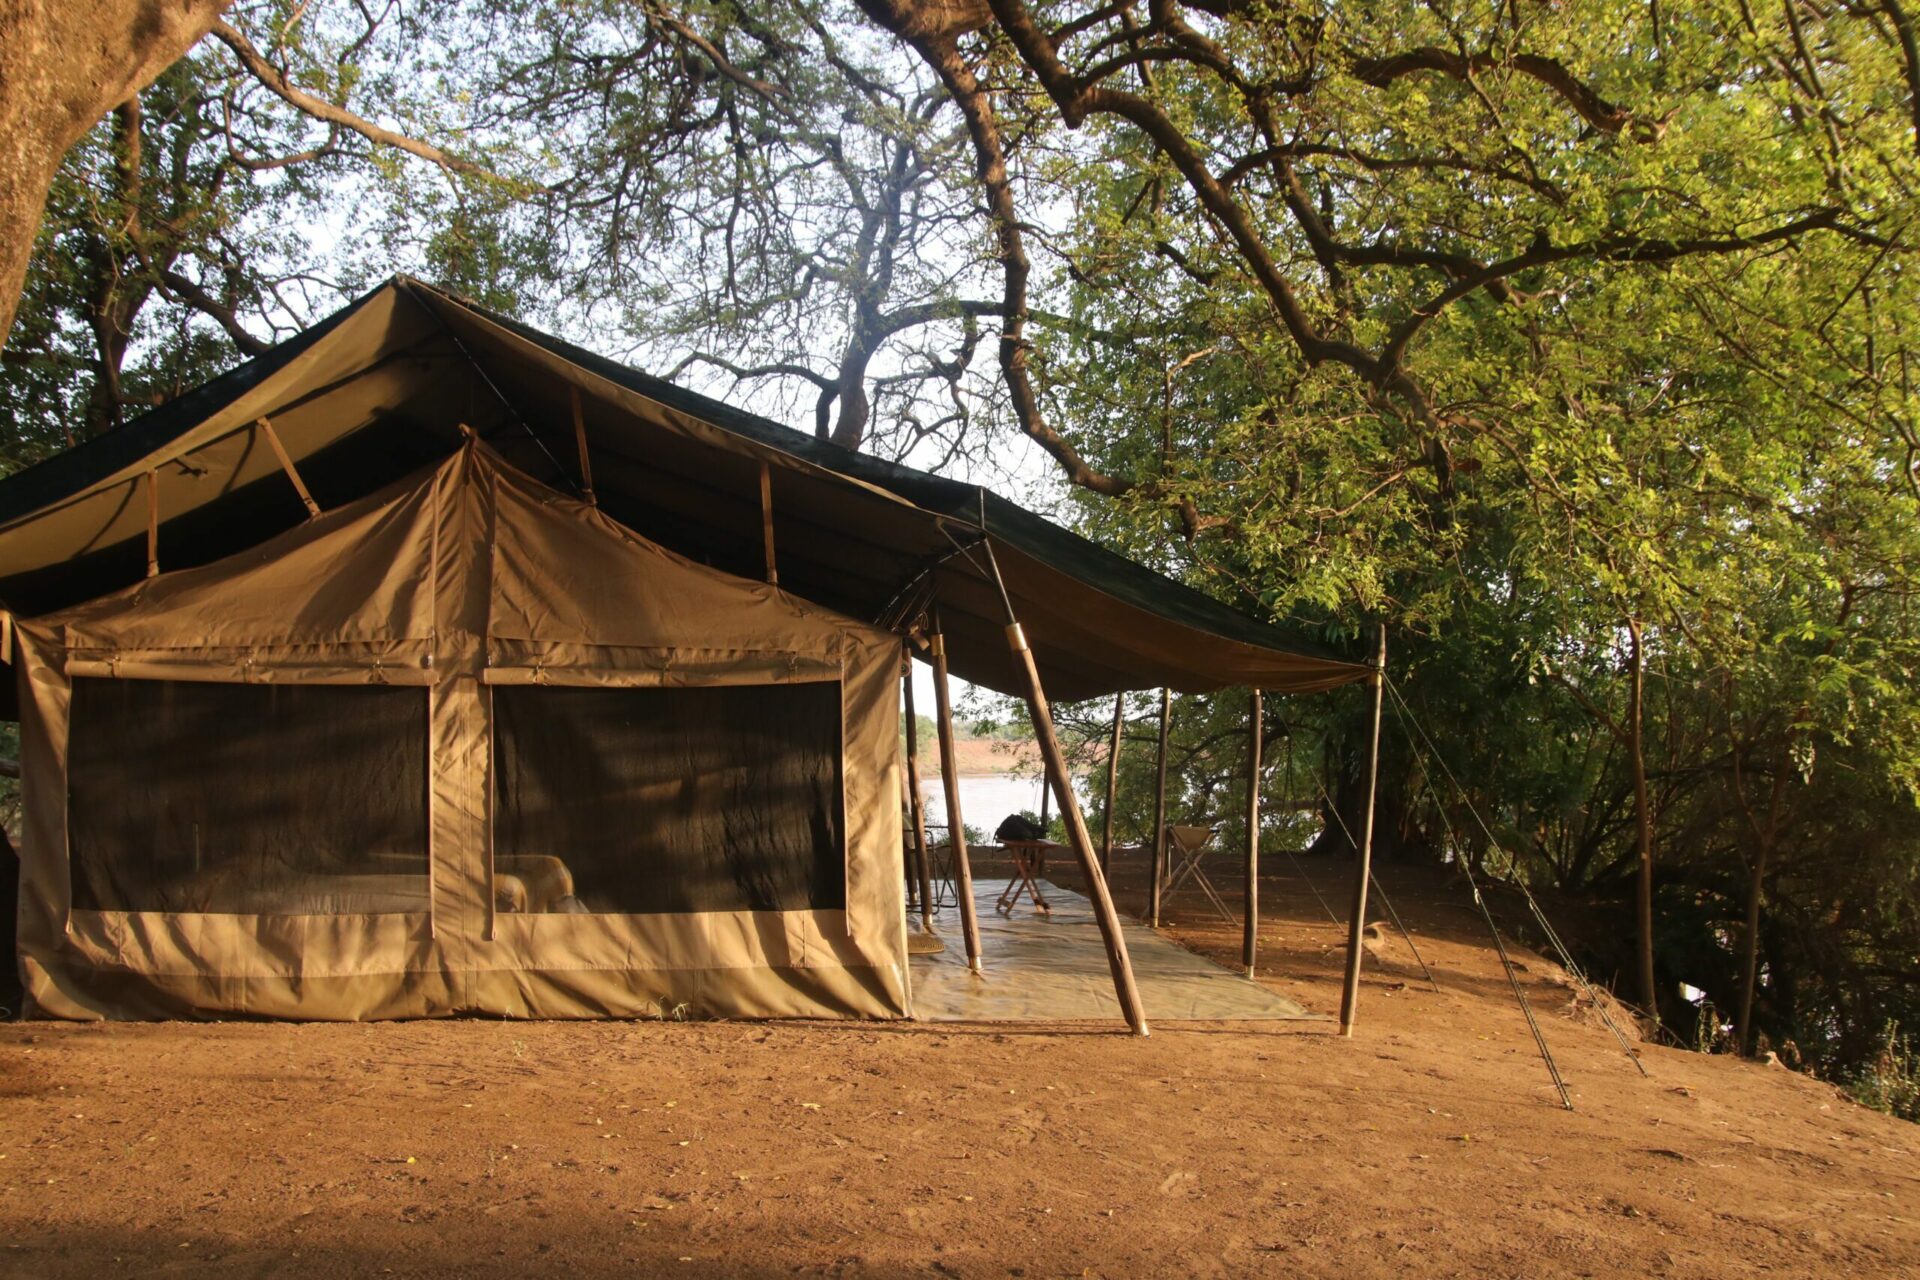 Lale's Camp tent exterior among the shaded trees in the Omo Valley